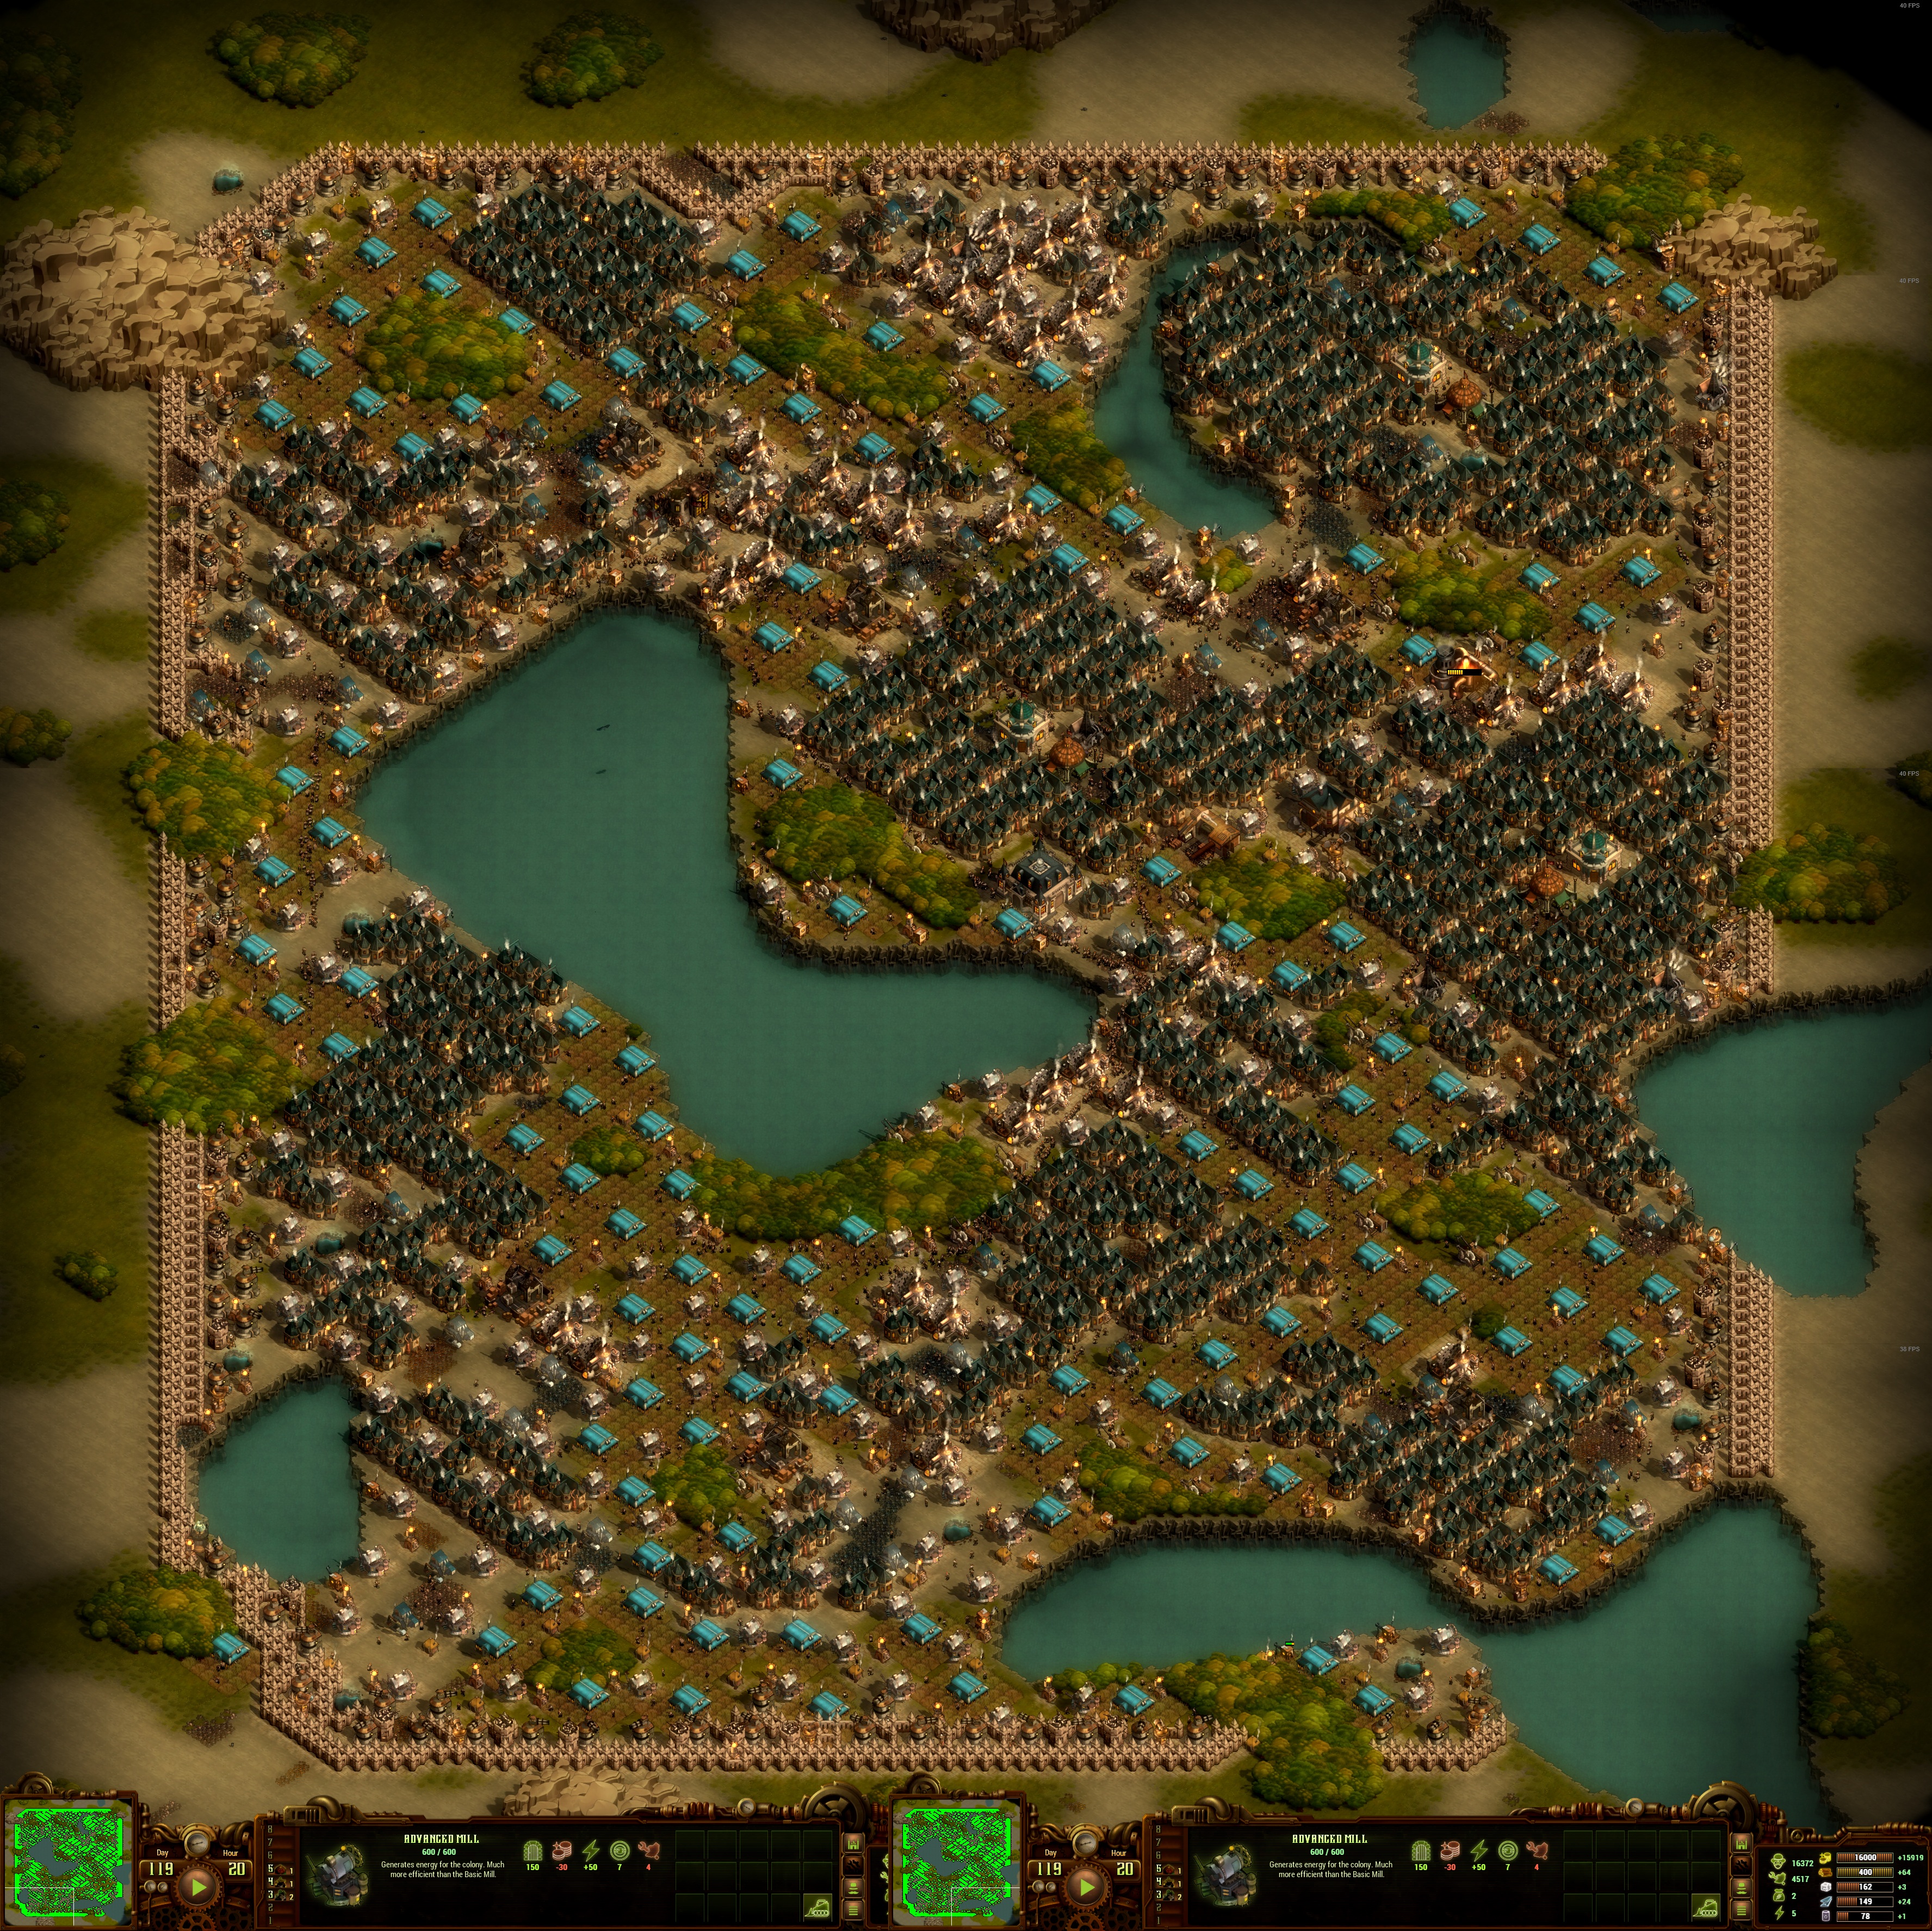 they are billions custom map download guide